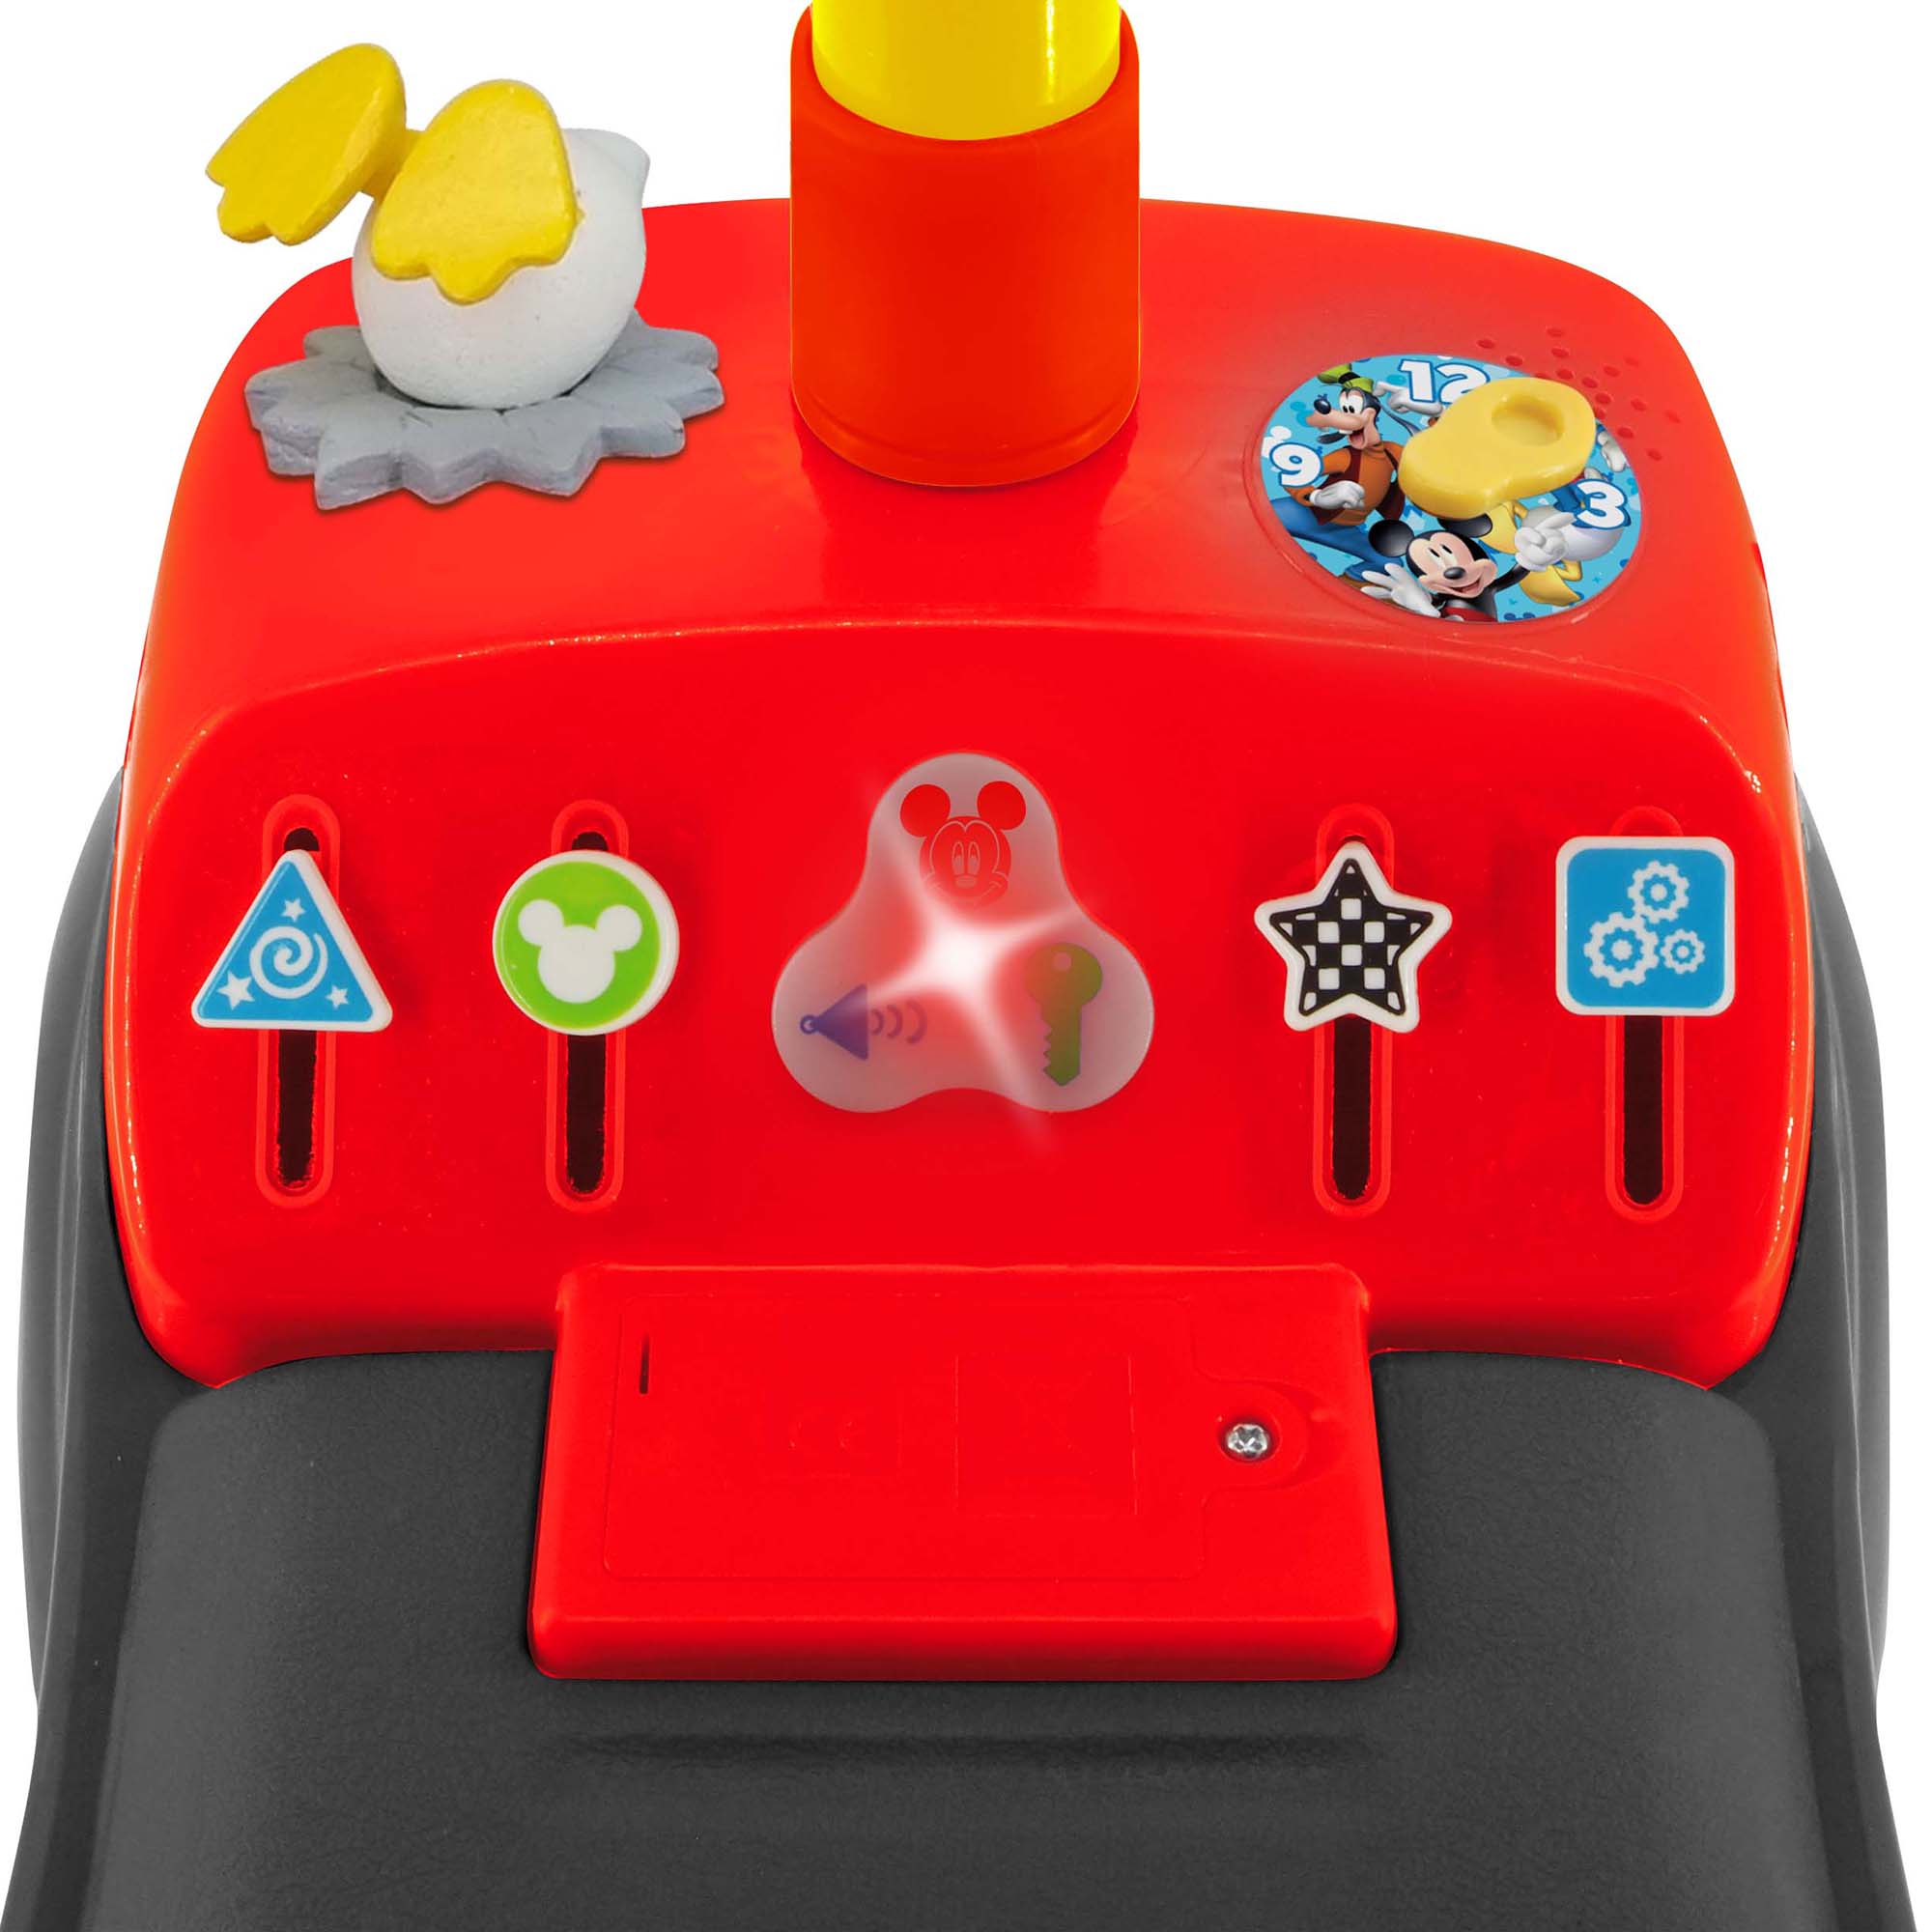 Kiddieland Disney Lights 'N' Sounds Ride-On: Mickey Mouse Kids Interactive Push Toy Car, Foot To Floor, Toddlers, Ages 12-36 Months - image 2 of 5